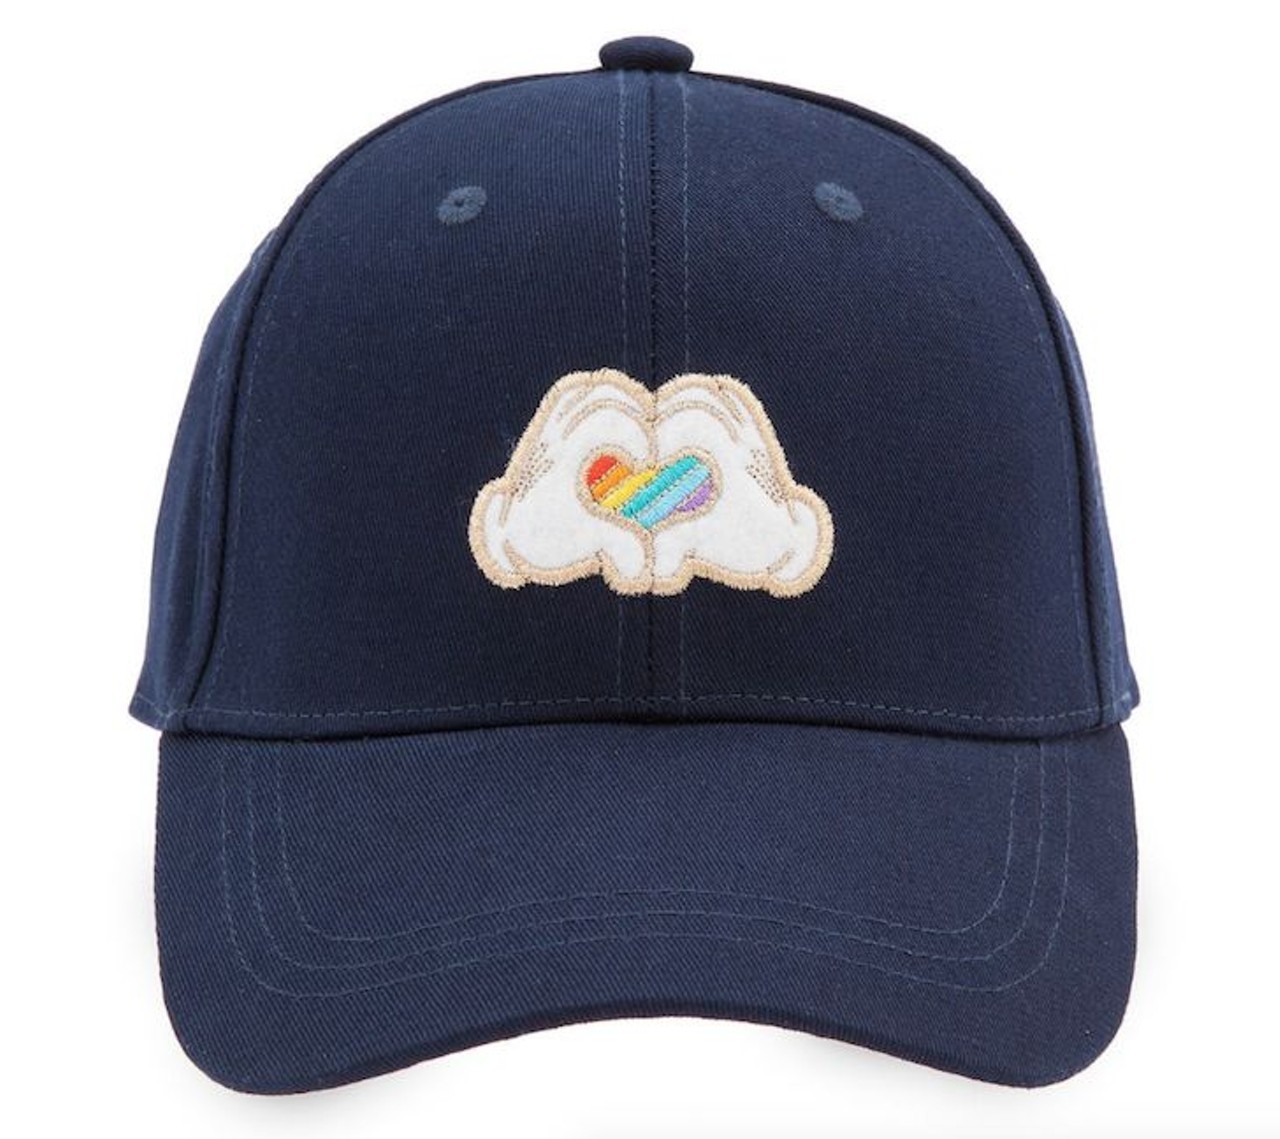 Mickey Mouse Heart Hands Baseball Cap
Cotton twill baseball cap is perfect to shade any face from the hot summer sun. A tropical Mickey pattern decorates the underside of the bill with Mickey hands in a heart shape filled with rainbow embroidery on the front, $19.95. 
Photo via shopDisney